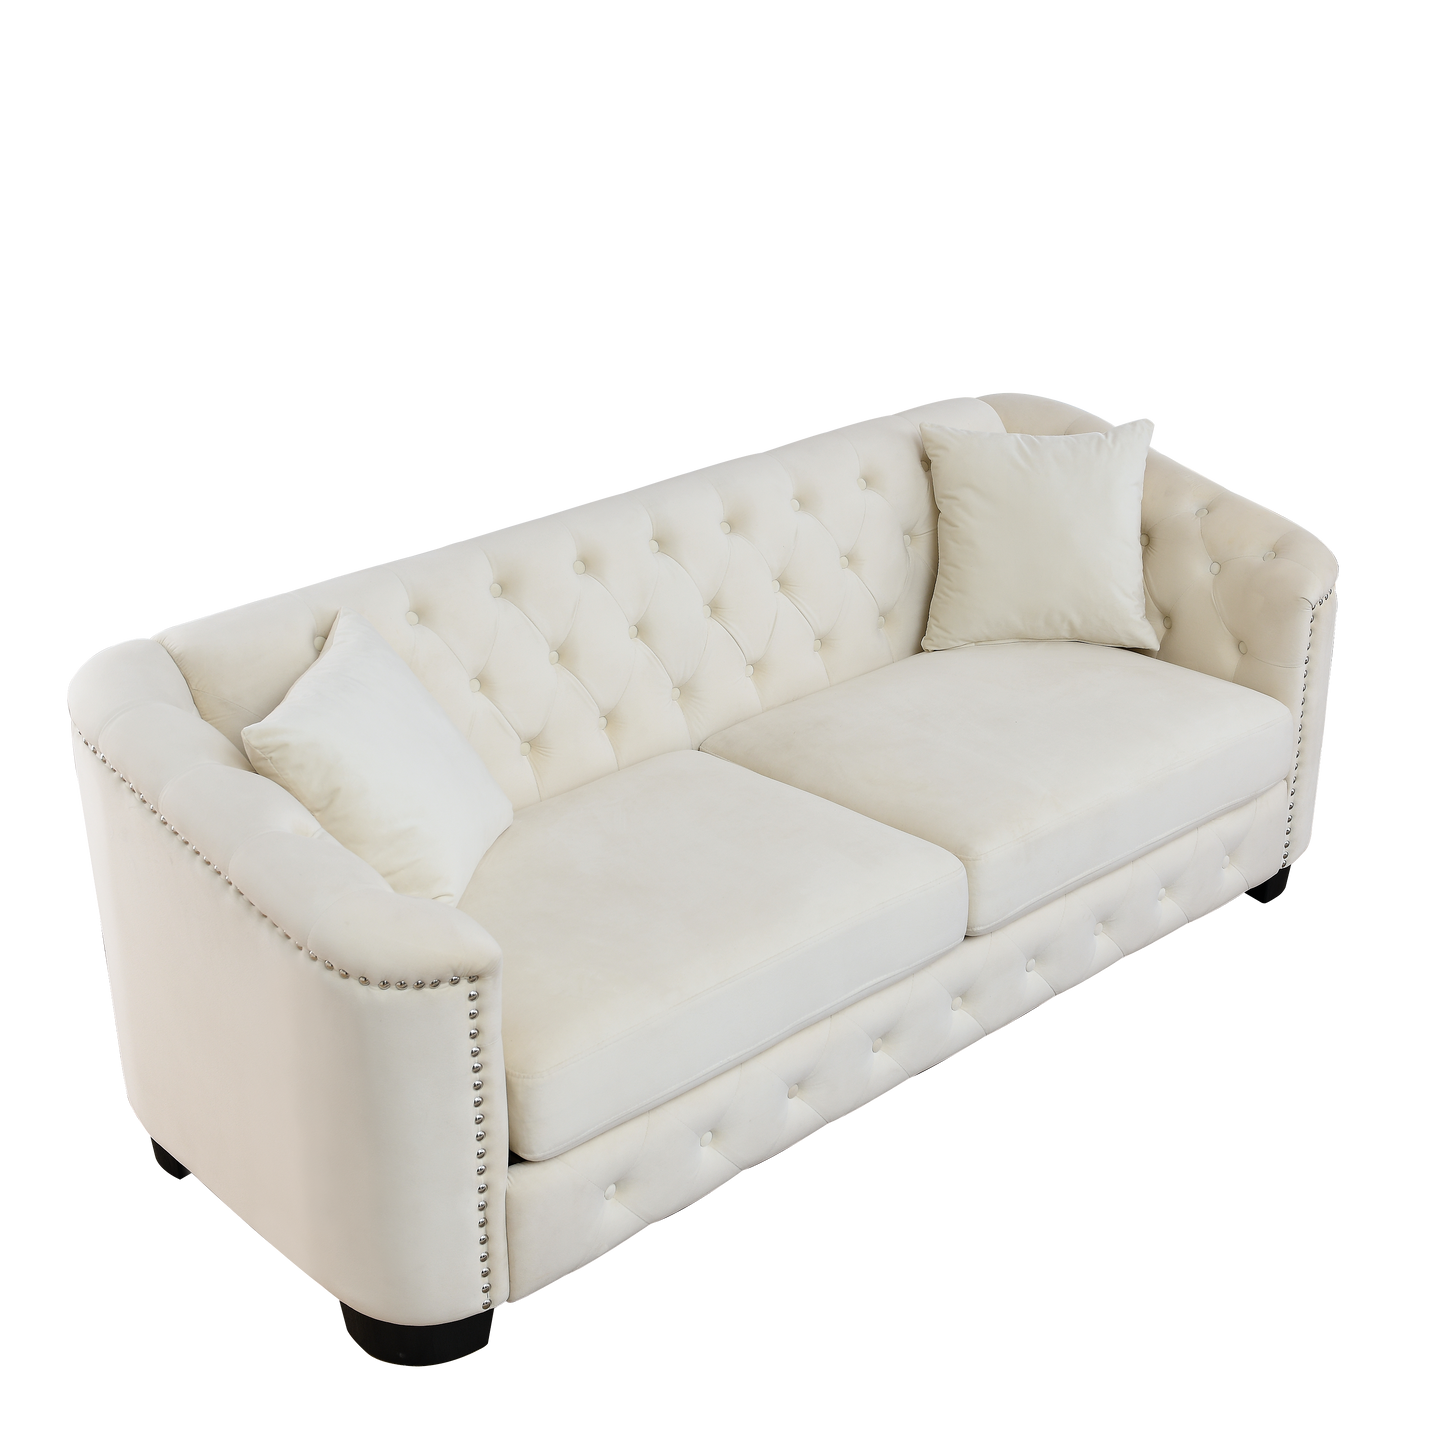 77-Inch Modern Chesterfield Velvet Sofa, 3-Seater Sofa, Upholstered Tufted Backrests with Nailhead Arms and 2 Cushions for Living Room, Bedroom, Apartment, Office (Beige)